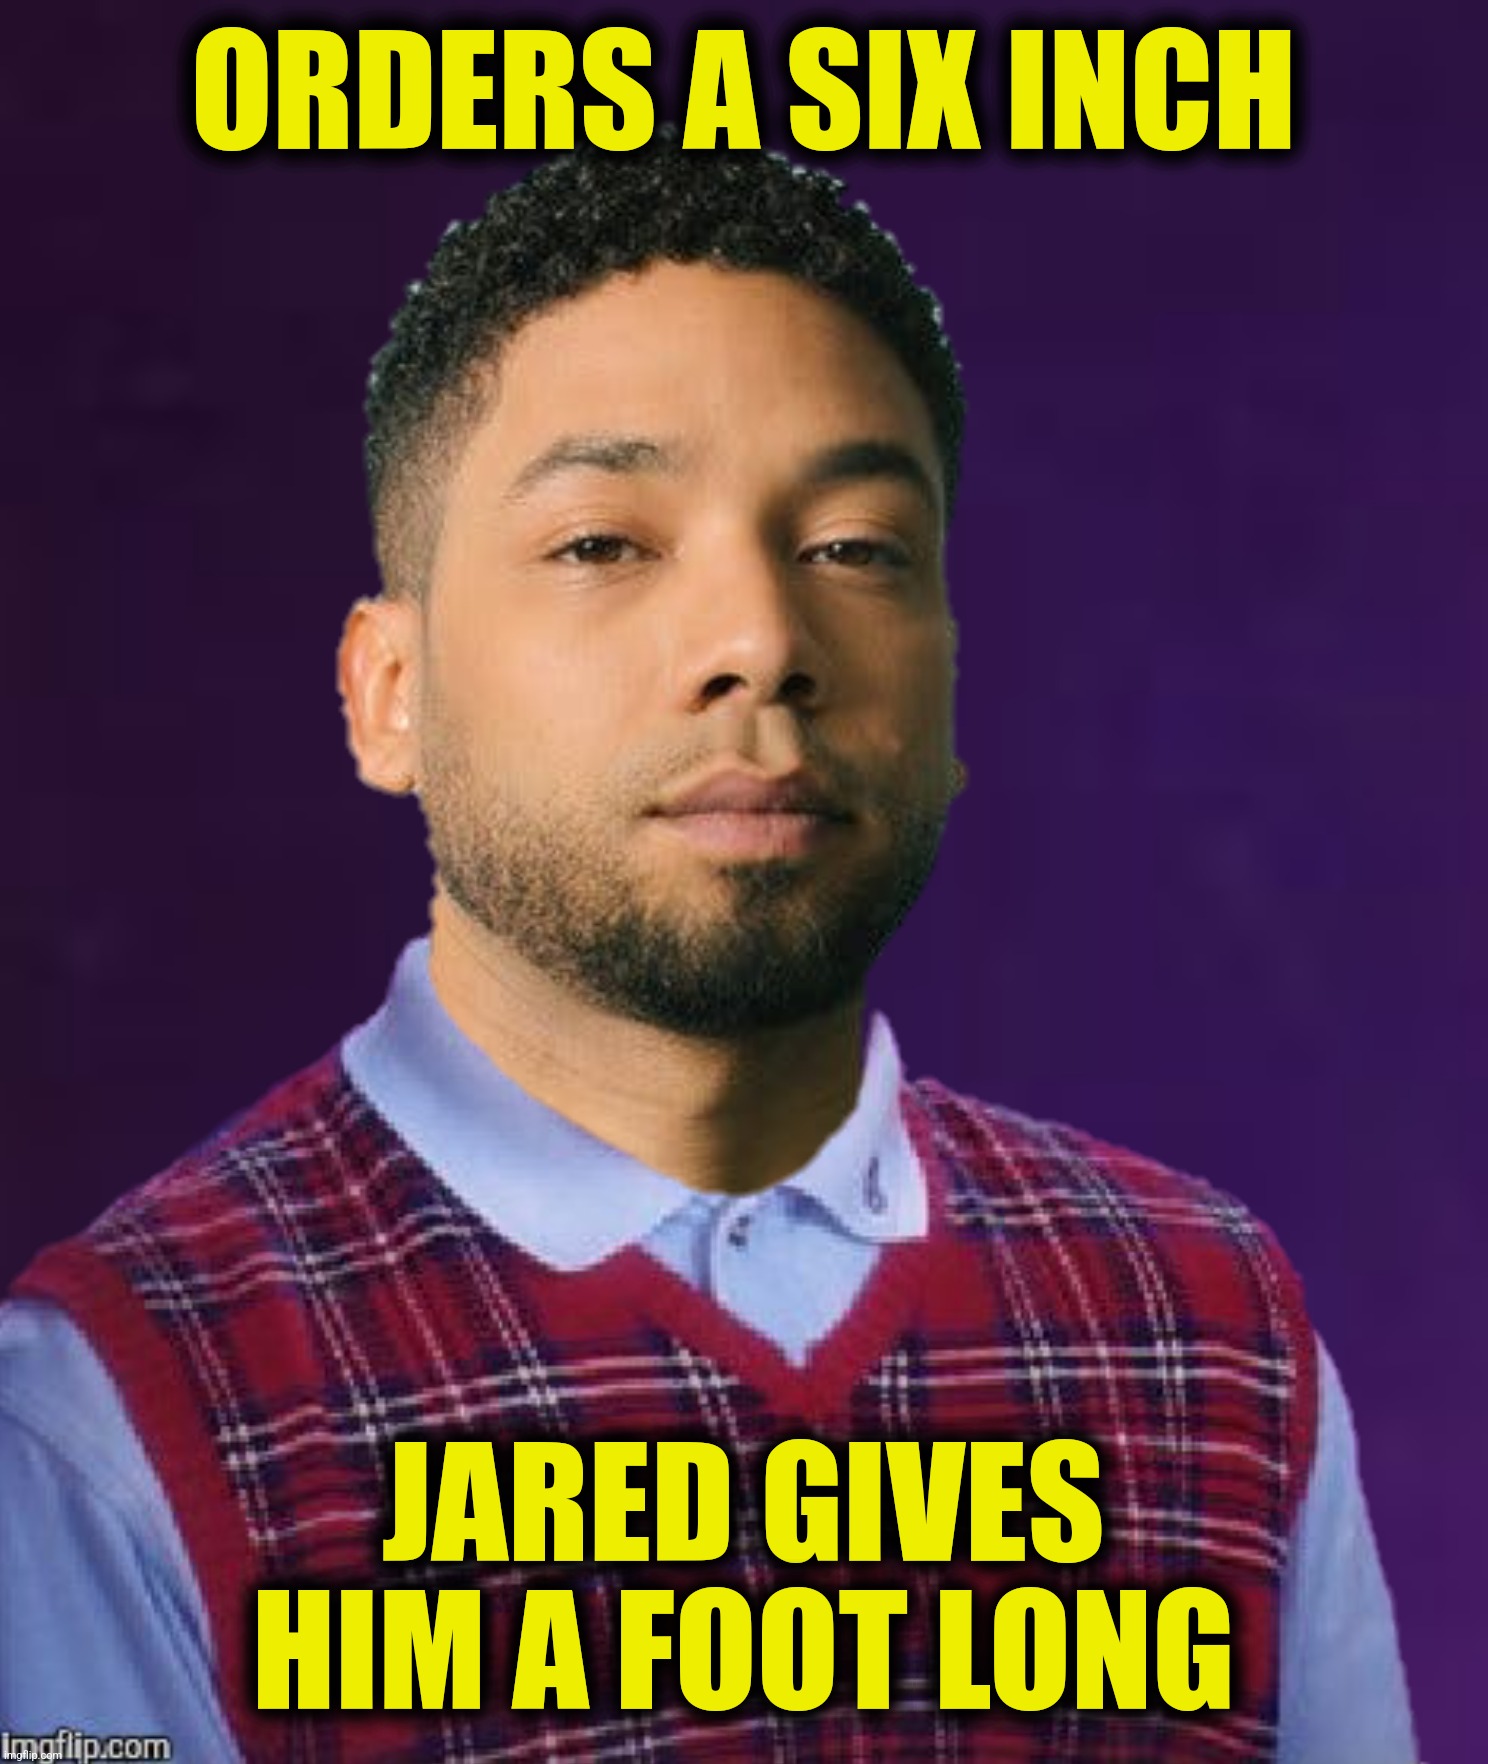 ORDERS A SIX INCH JARED GIVES HIM A FOOT LONG | made w/ Imgflip meme maker